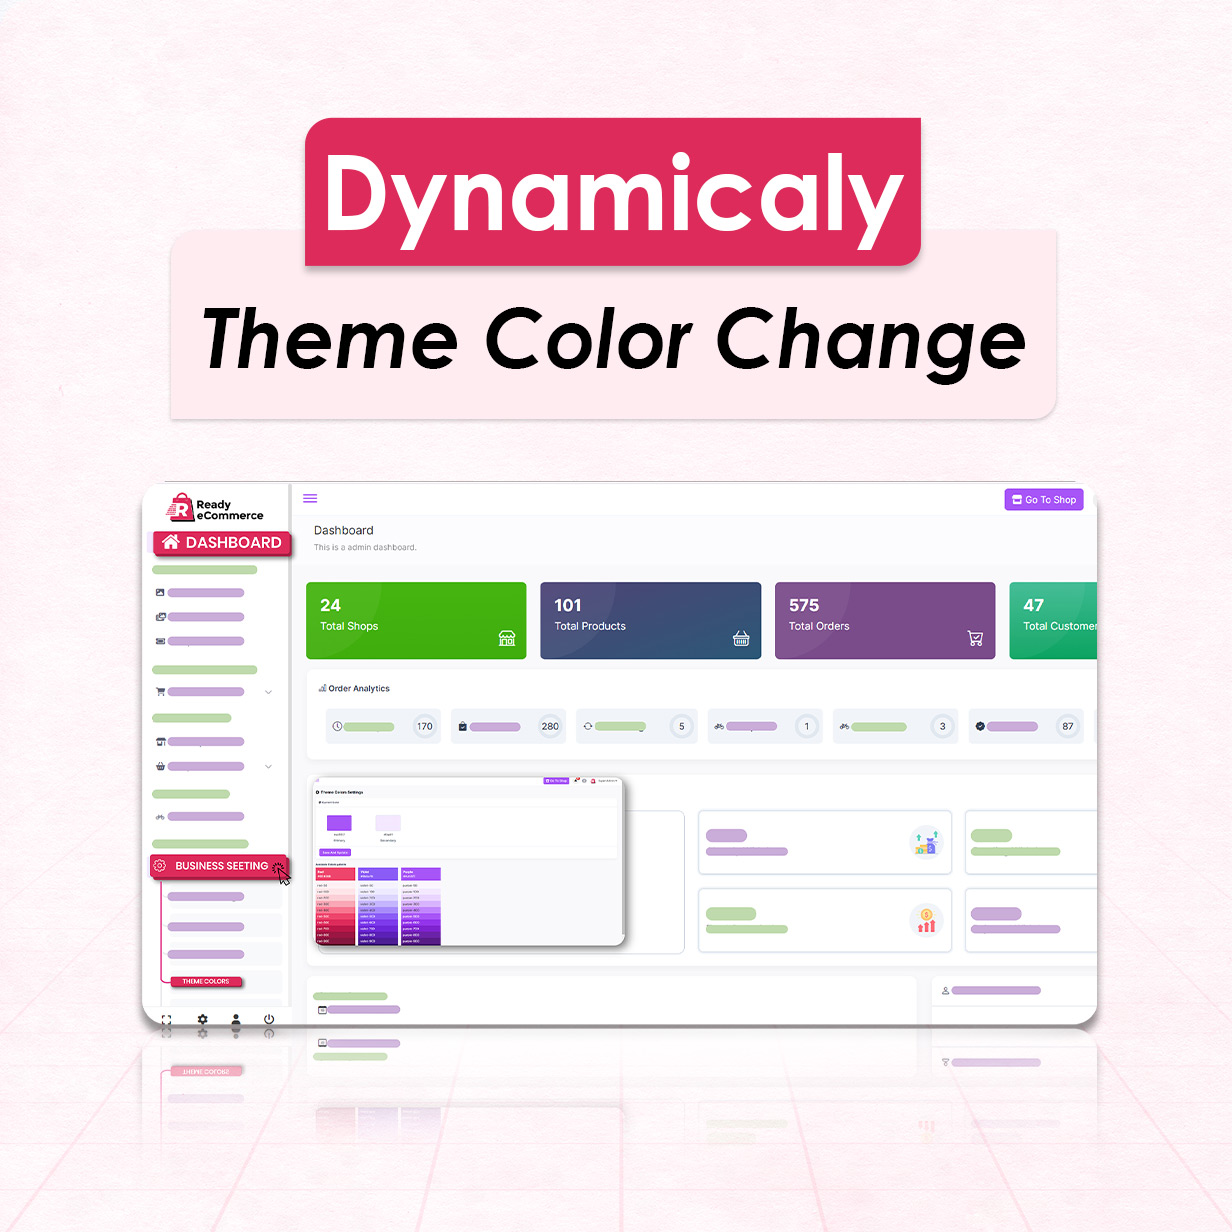 Ready-E-commerce-Dynamicaly-Theme-Colo